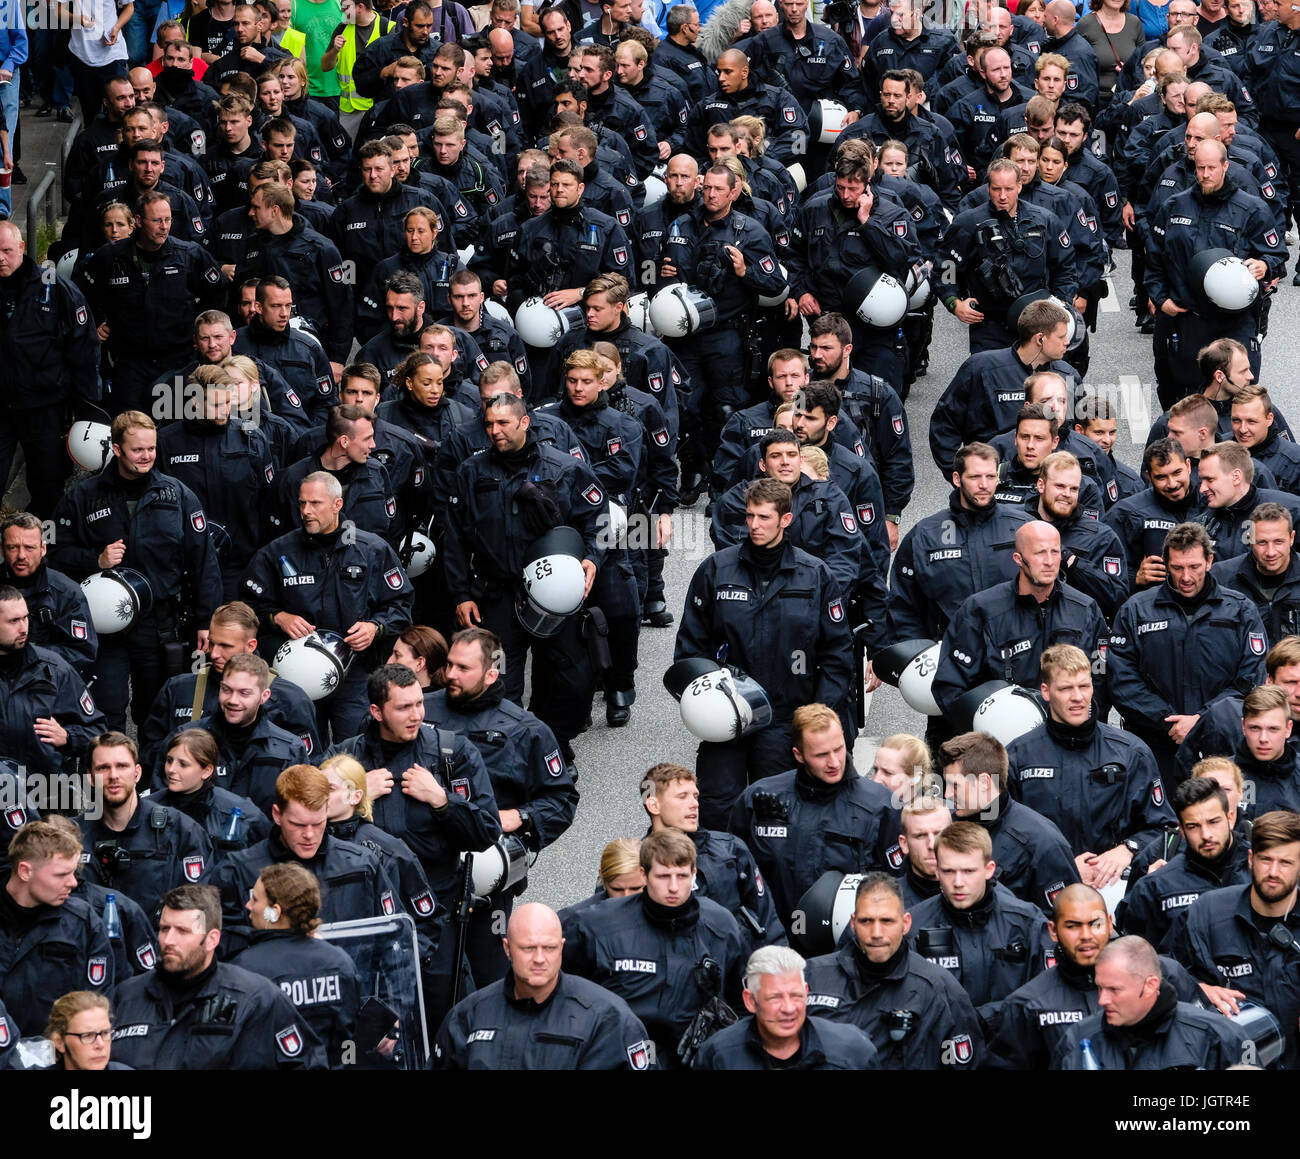 8th July, 2017. Hamburg, Germany. large demonstration march through central Hamburg protesting against G20 Summit  in city. Here large group of police Stock Photo